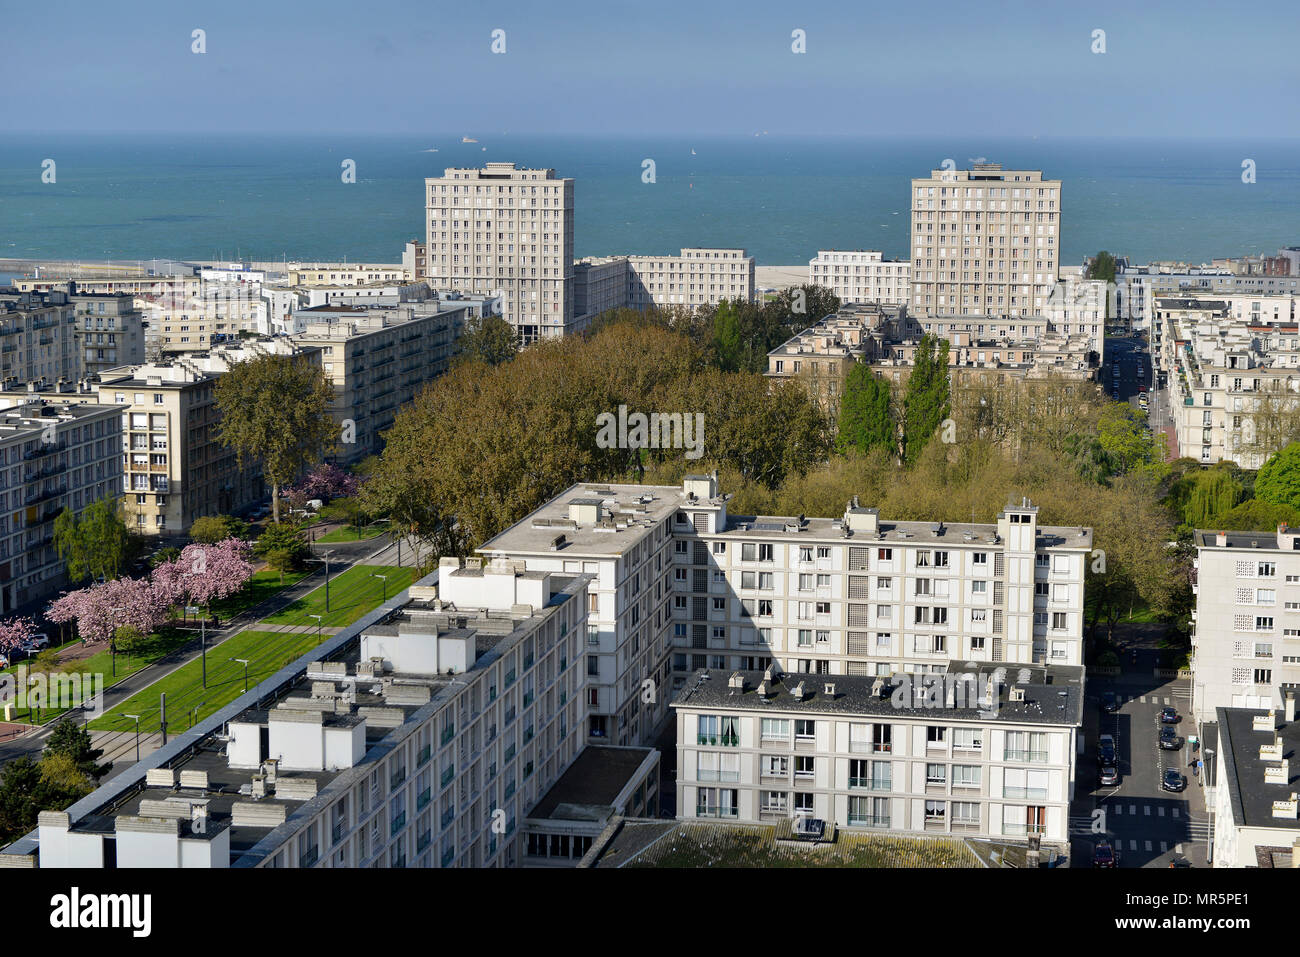 Le Havre (Normandy, north western France): Avenue Foch with the city gate "Porte  Oceane" in the background *** Local Caption *** Stock Photo - Alamy